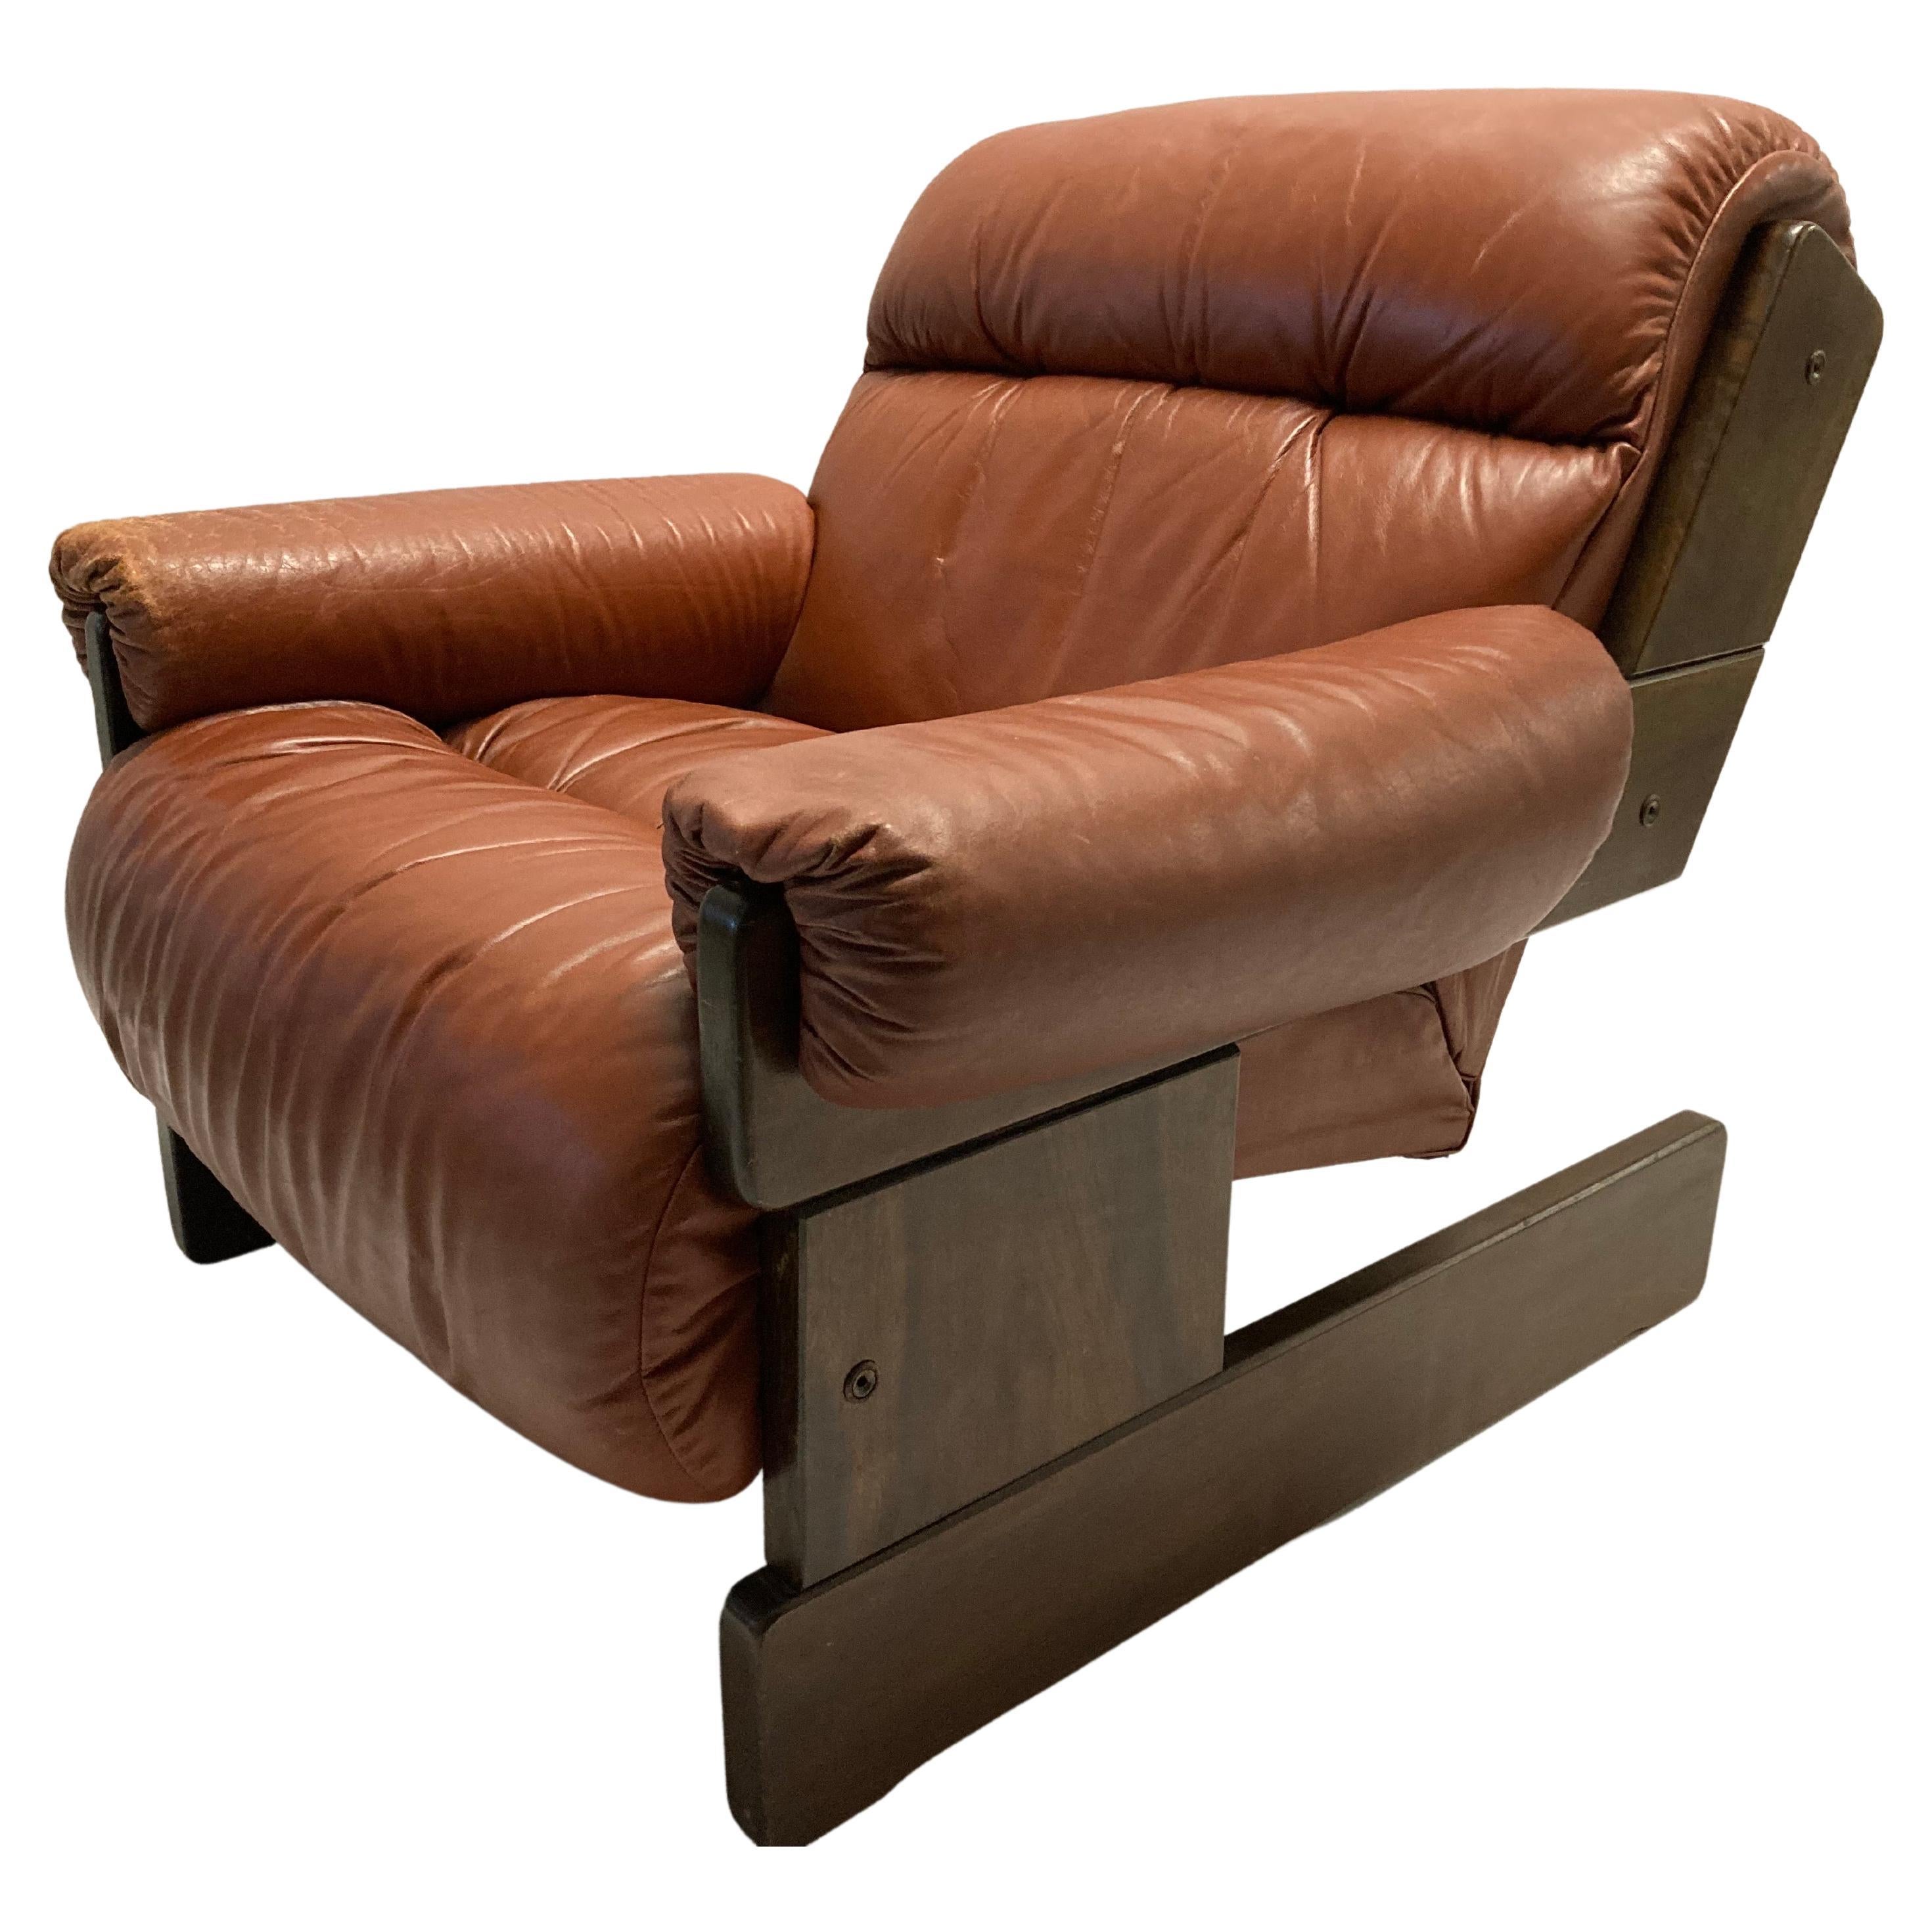 1960s Leather Armachair by Jean Gillon for Probel, Brazil